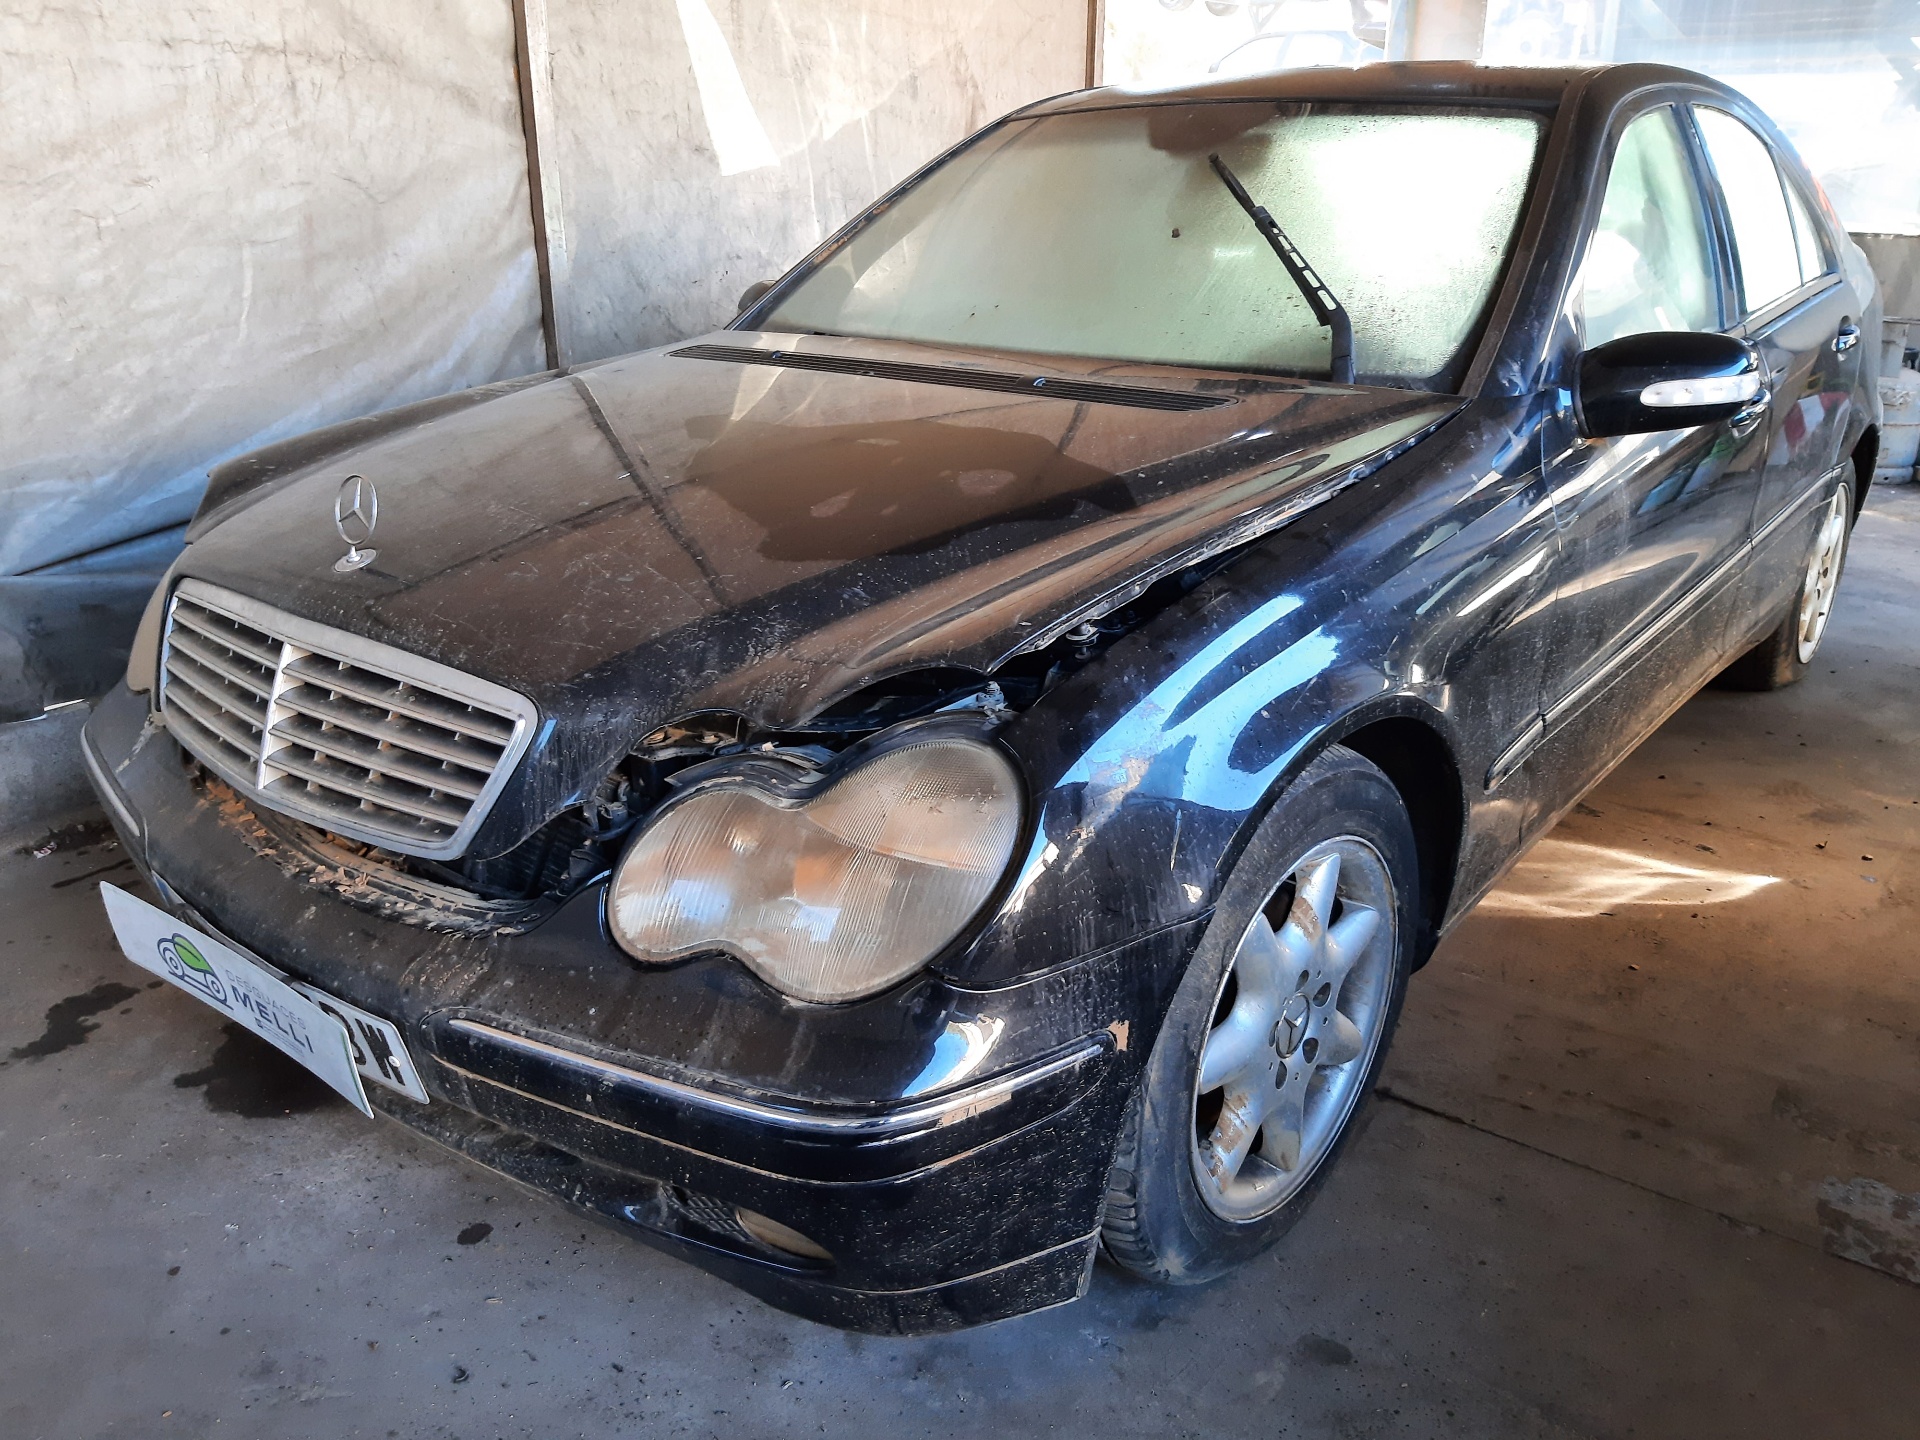 MERCEDES-BENZ C-Class W203/S203/CL203 (2000-2008) Other Control Units 2038202285 22019180